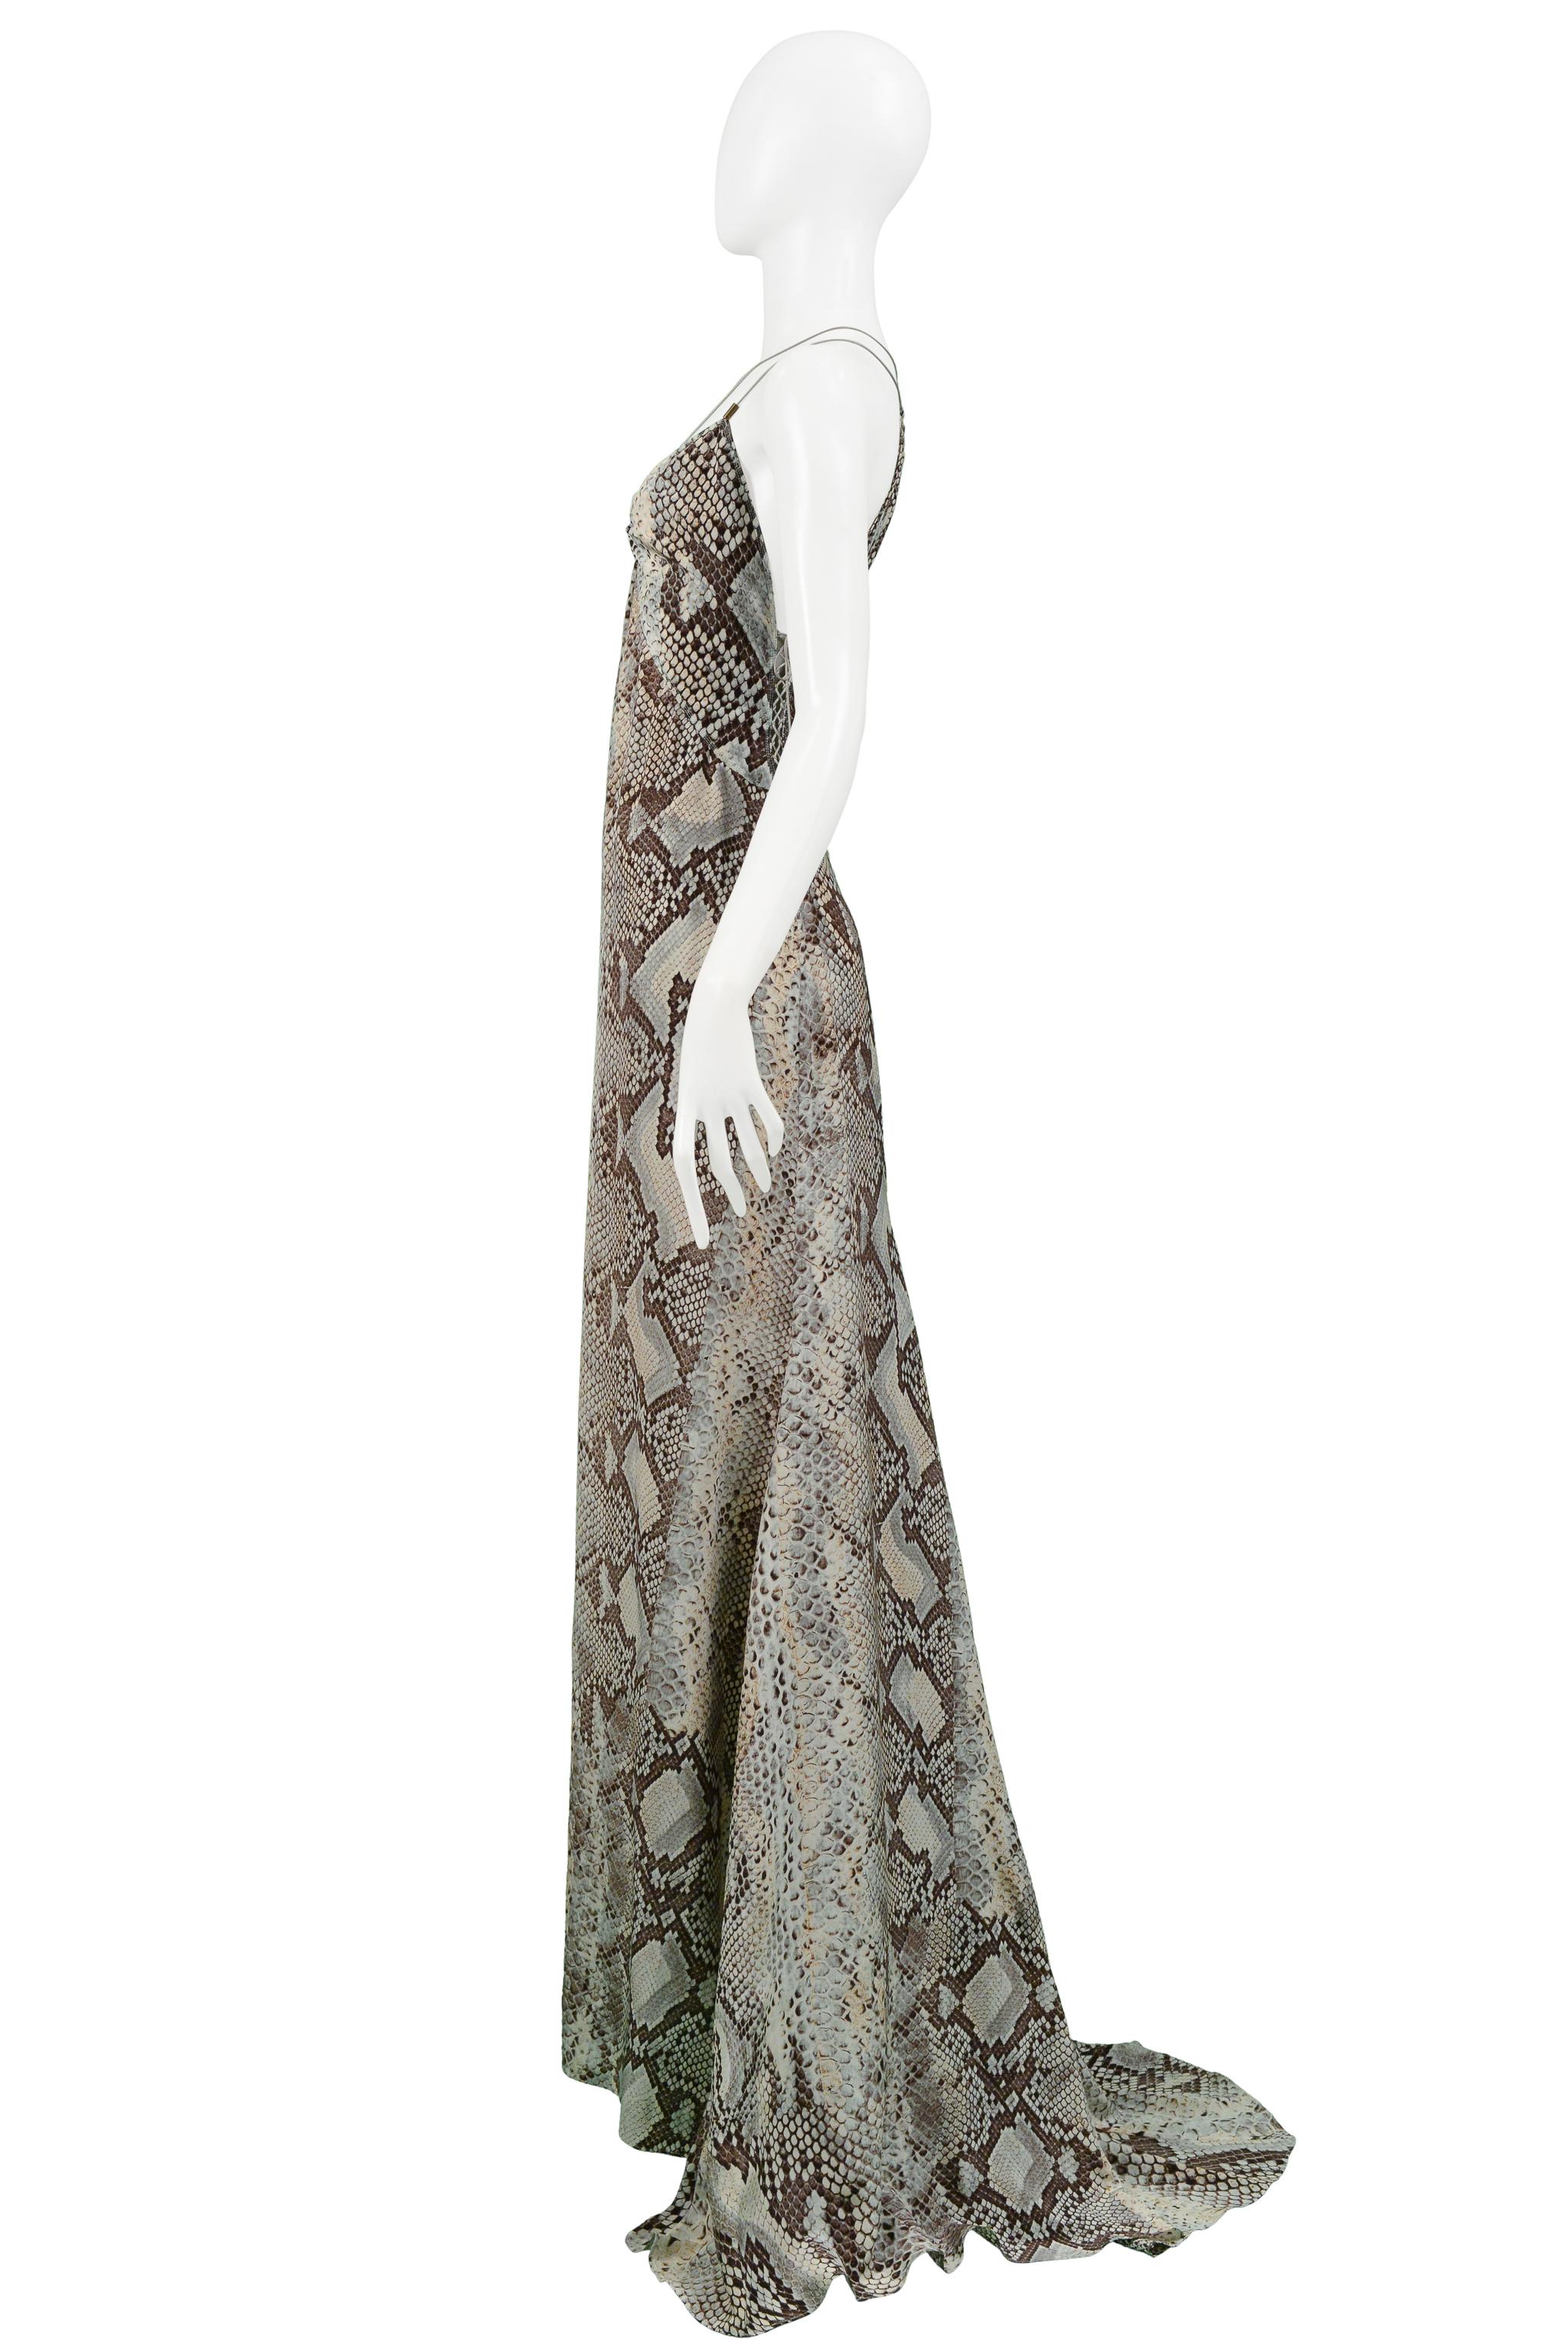 Roberto Cavalli Blue & Grey Snake Print Evening Gown With Silver Hardware 2011 For Sale 1